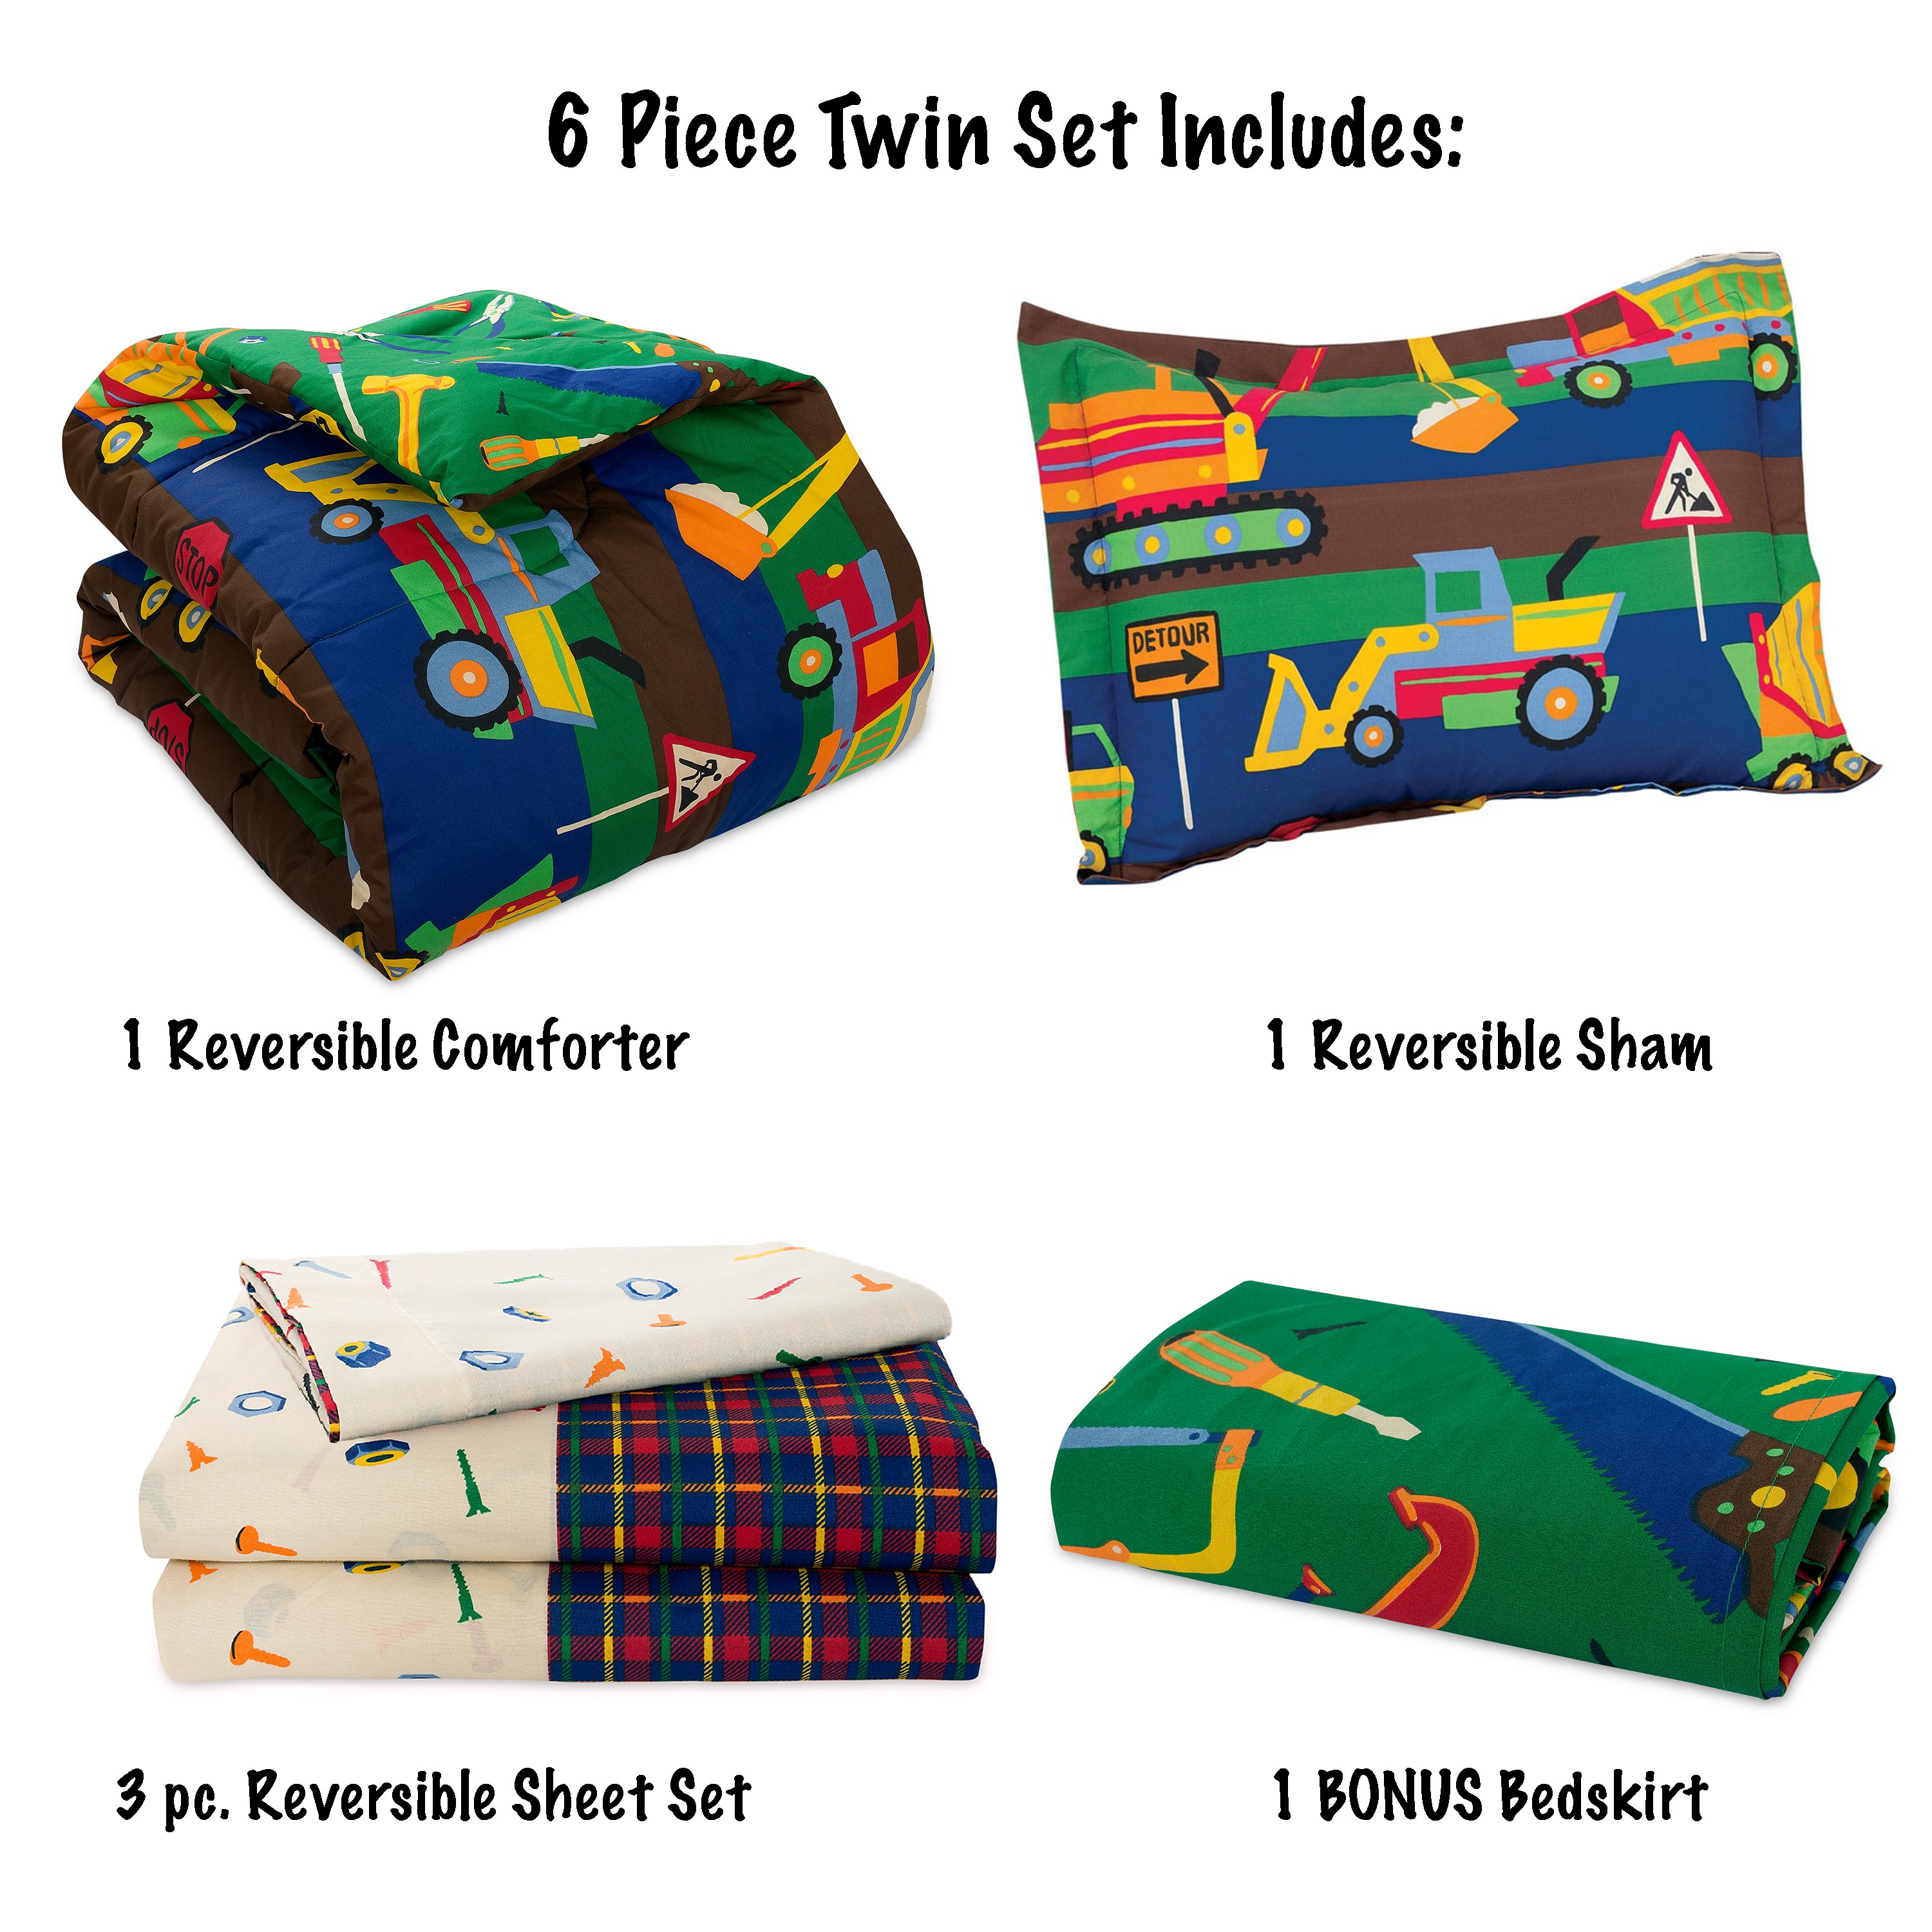 Kidz Mix Construction Zone Bed In A Bag Kids Bedding Set, Reversible, With Bonus Bed Skirt - image 3 of 11